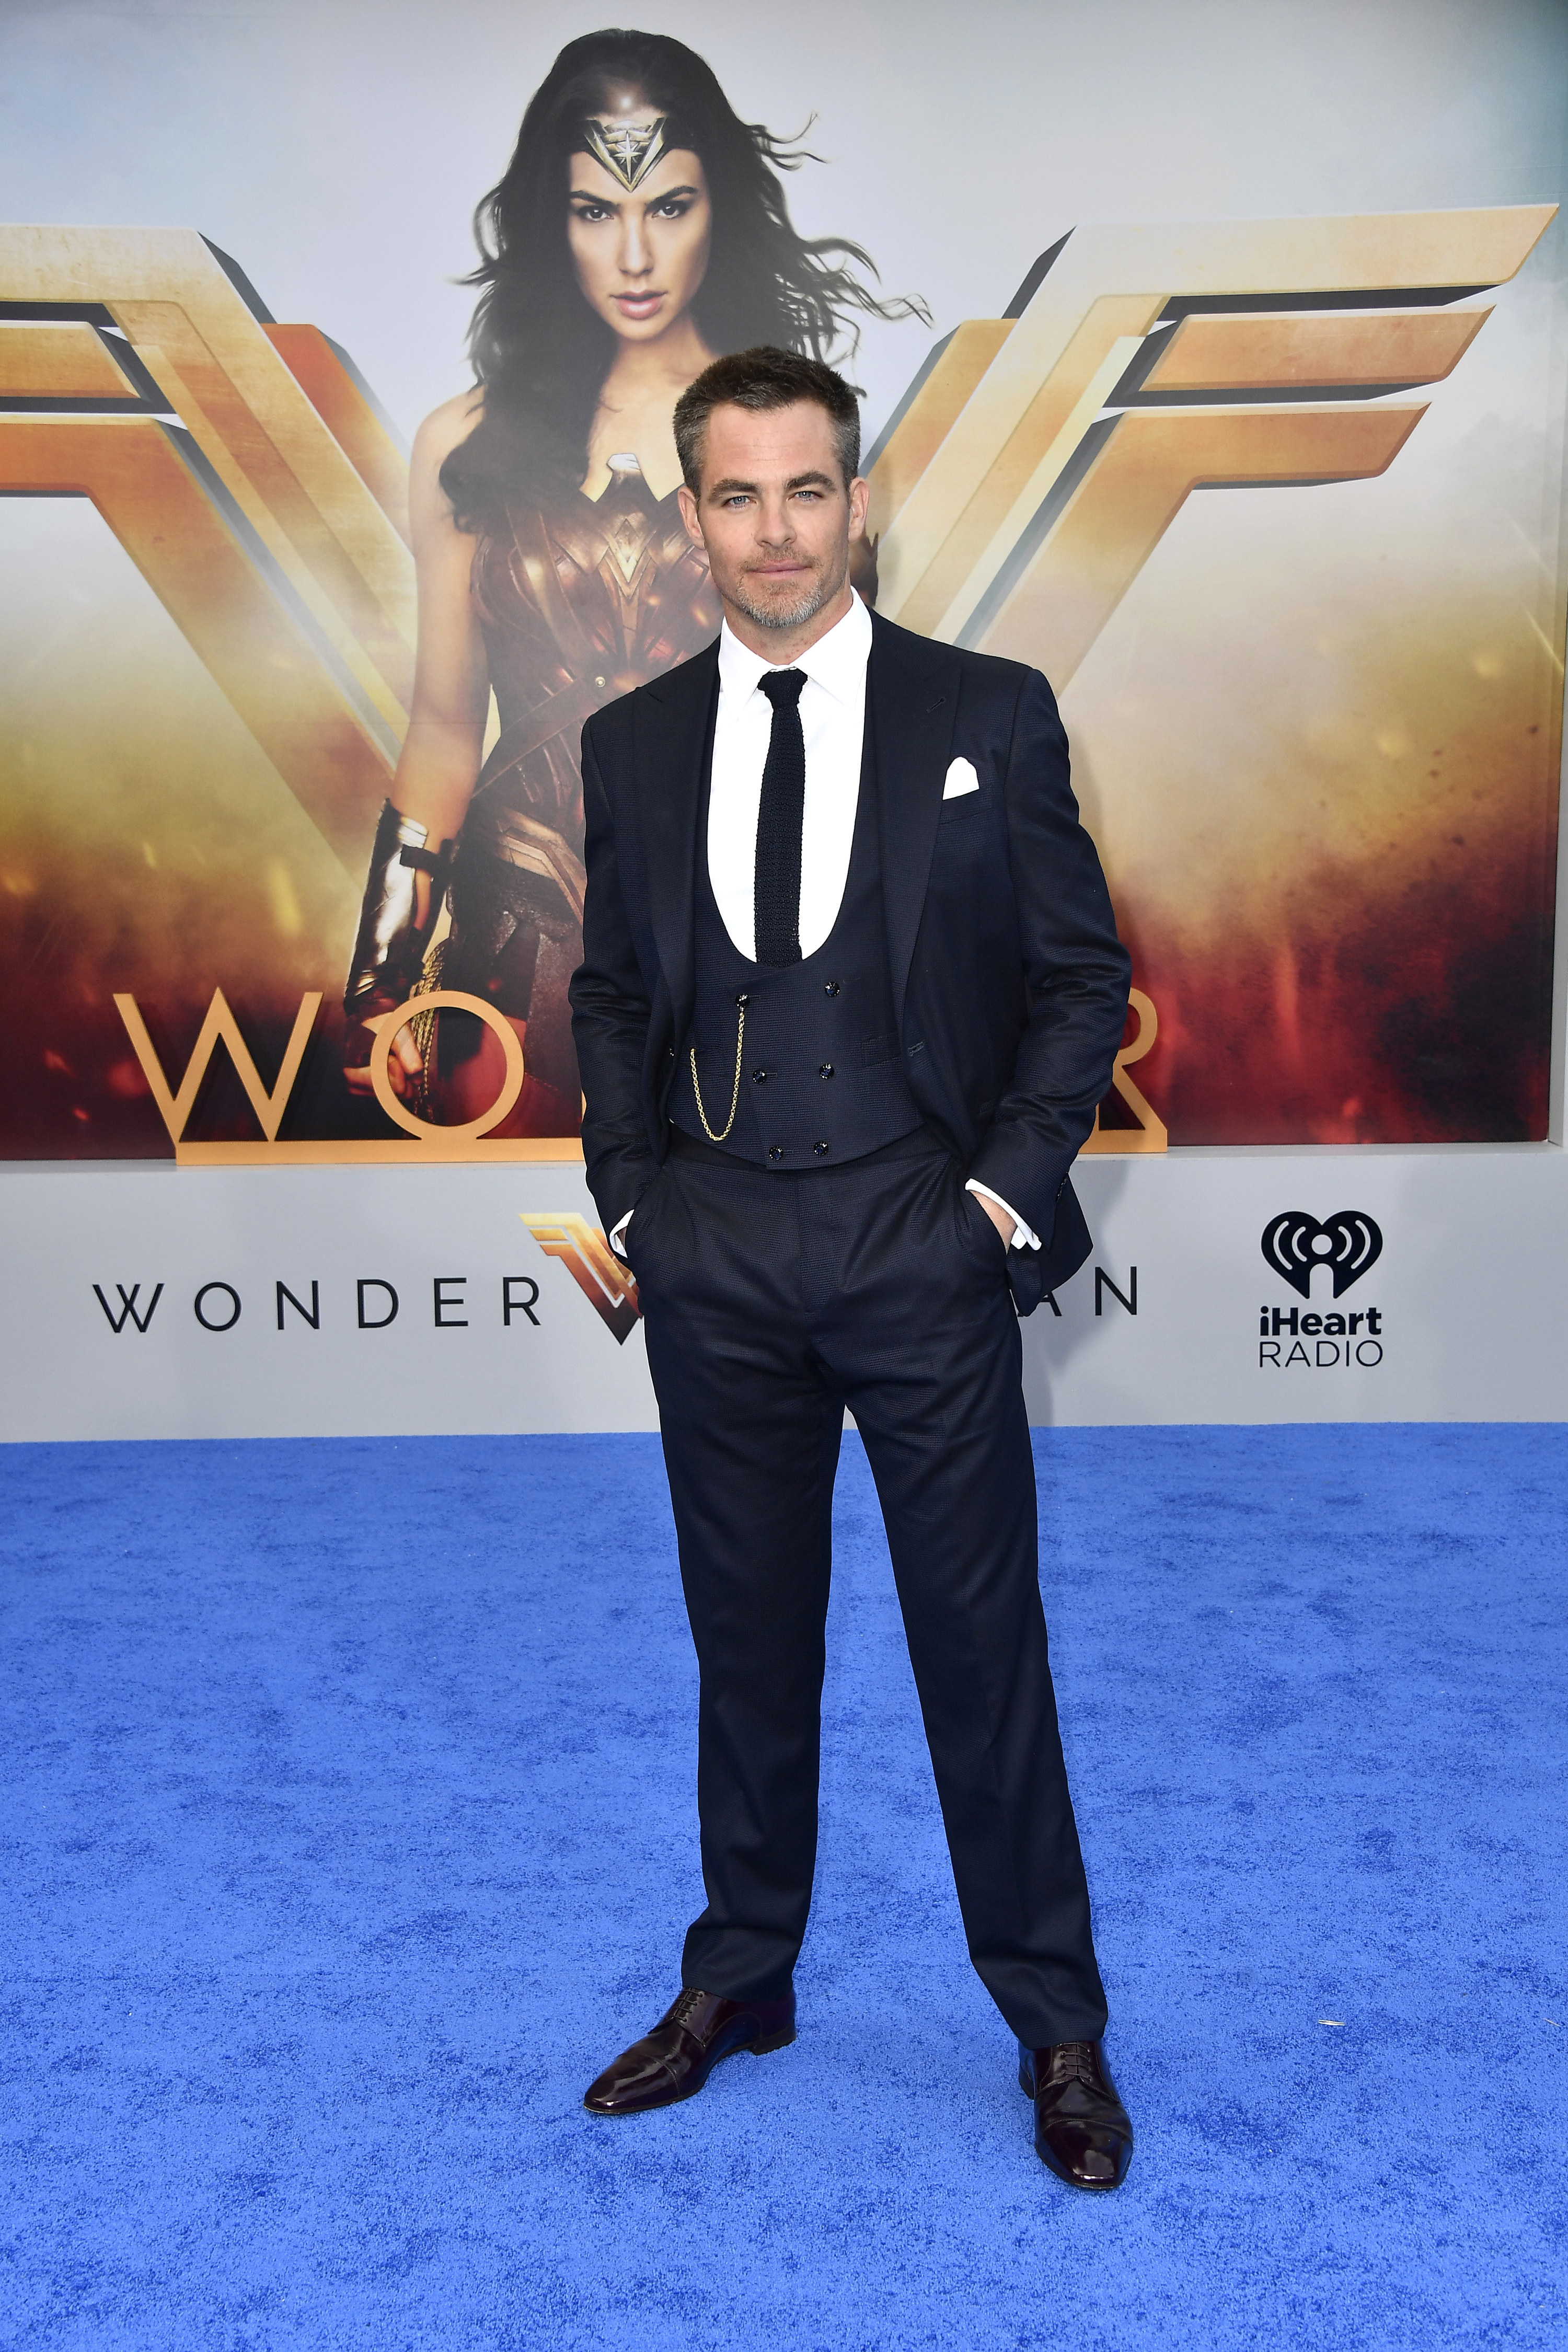 Chris at the Wonder Woman premiere, wearing a black three piece suit with a white shirt.